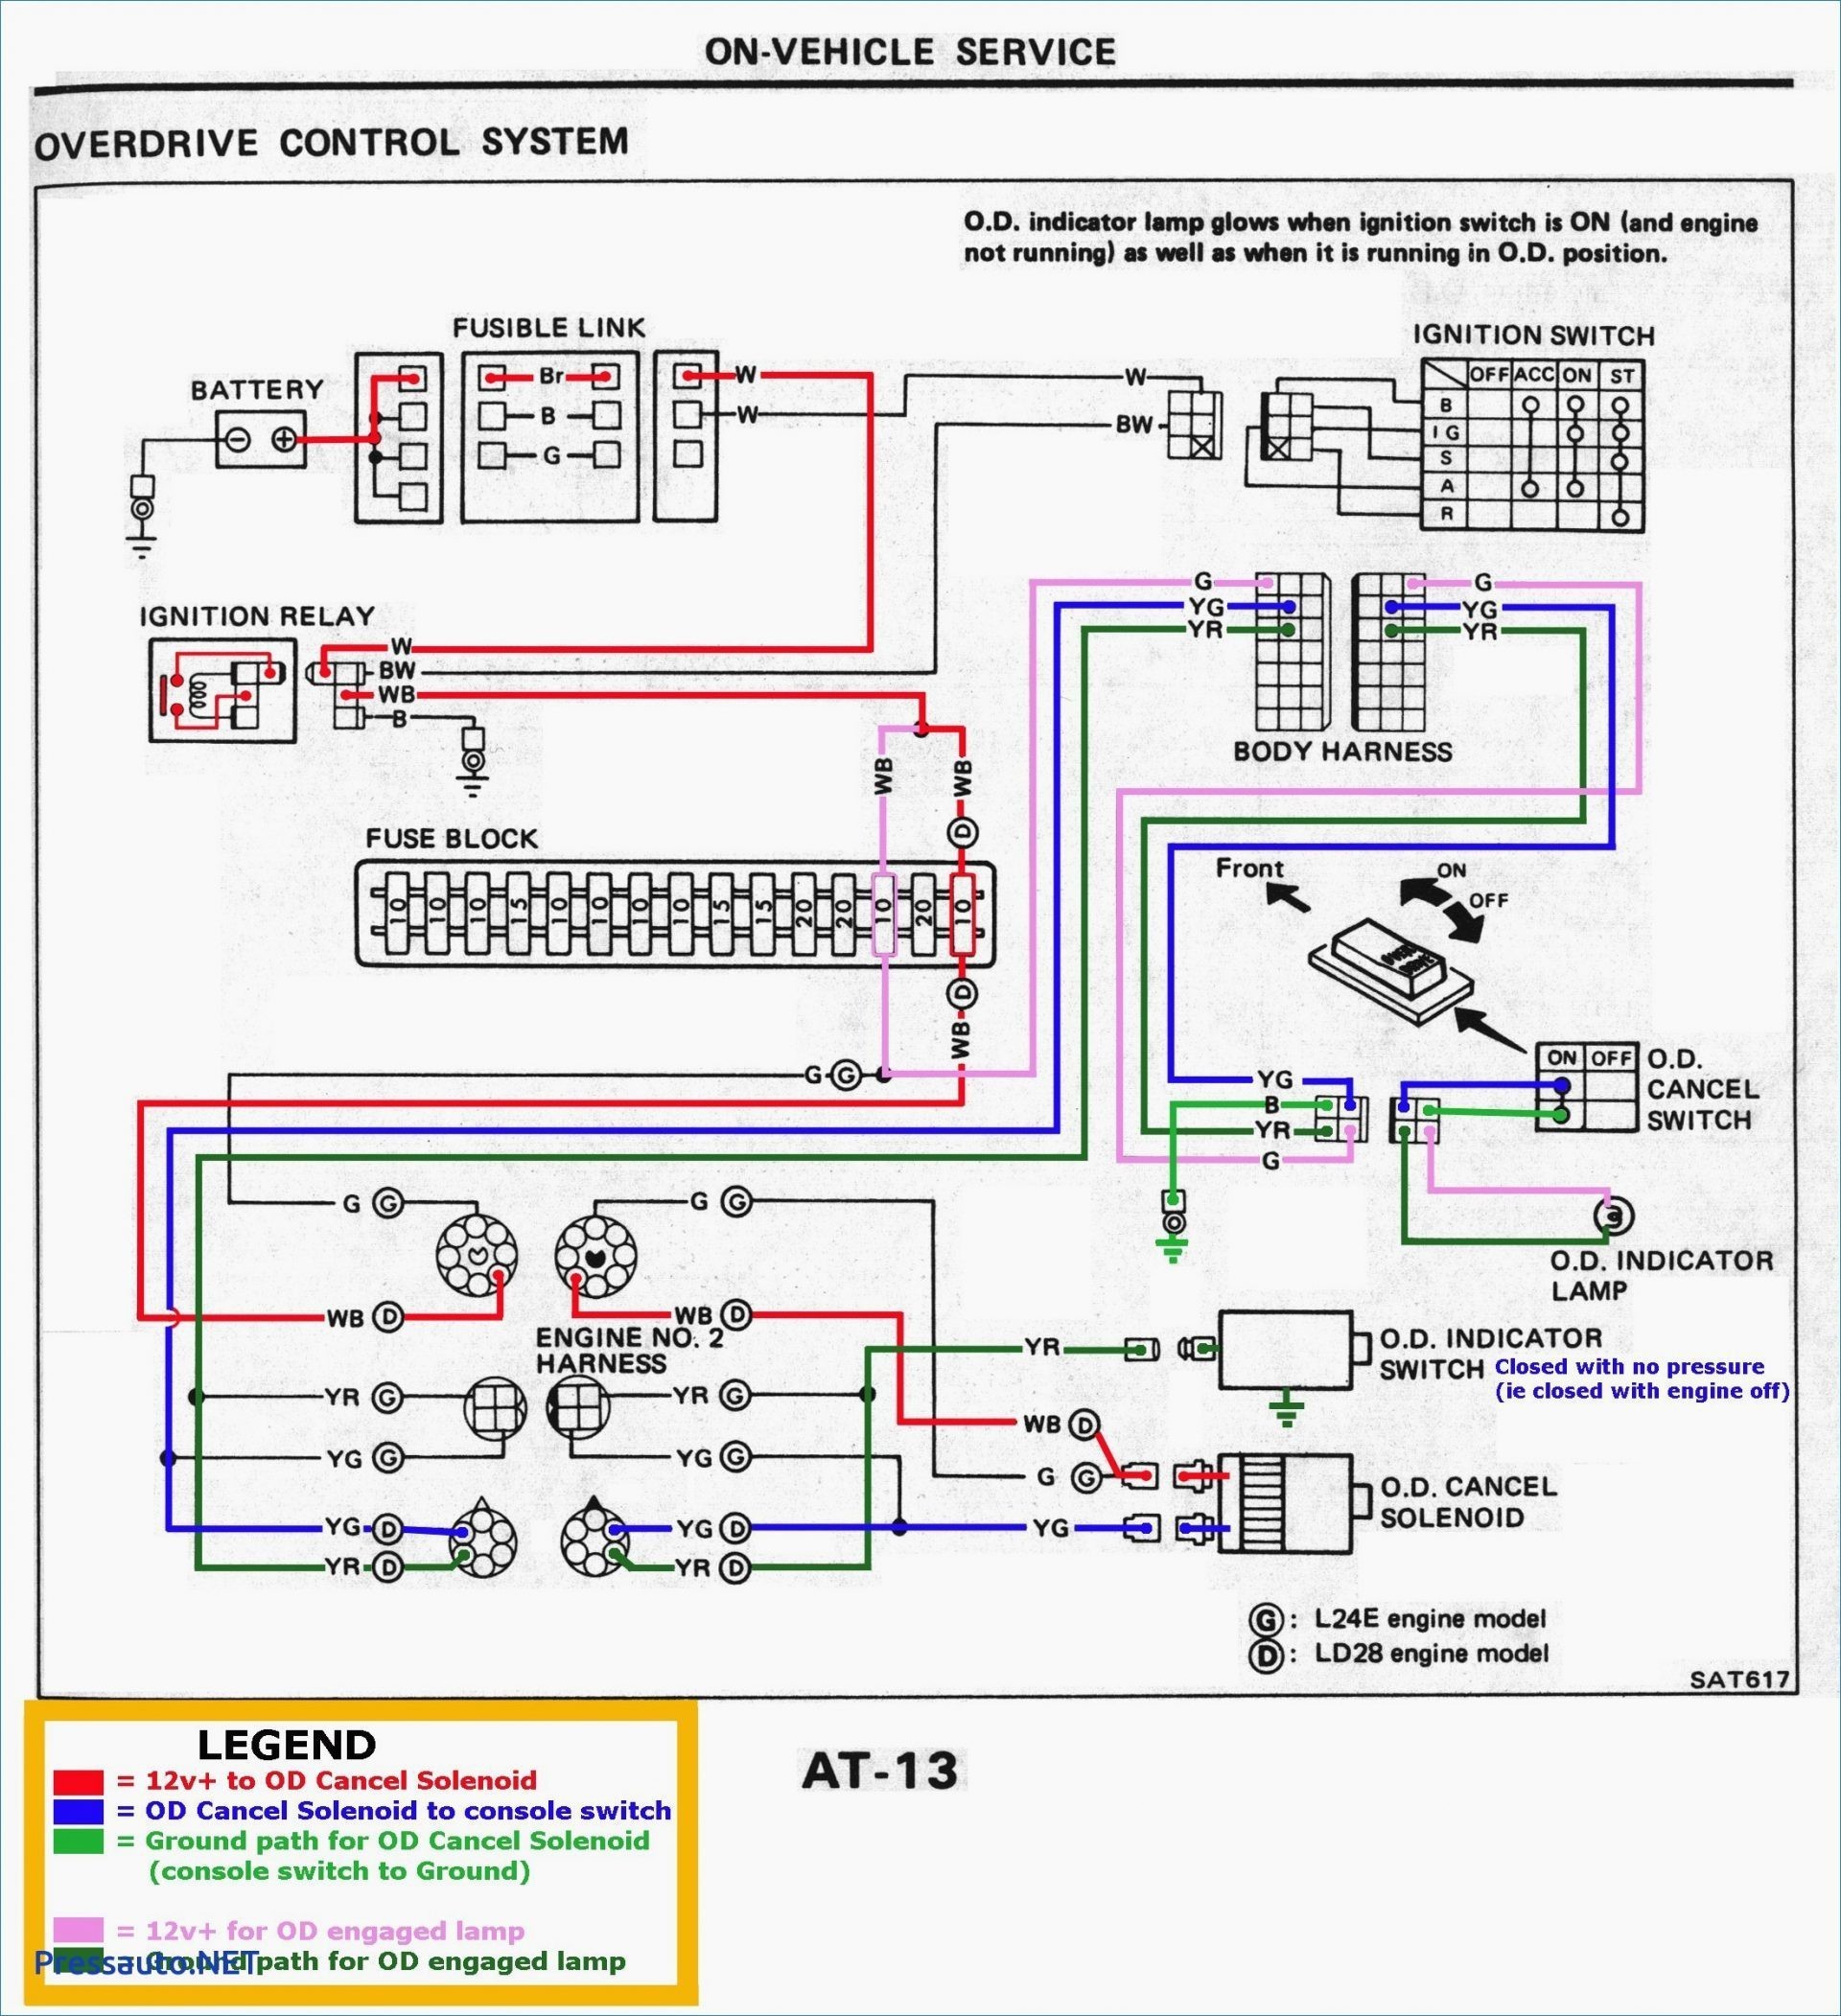 House Trailer Wiring Diagram Save Wiring Diagram for Boat Trailer Plug top Rated Harbor Freight Boat